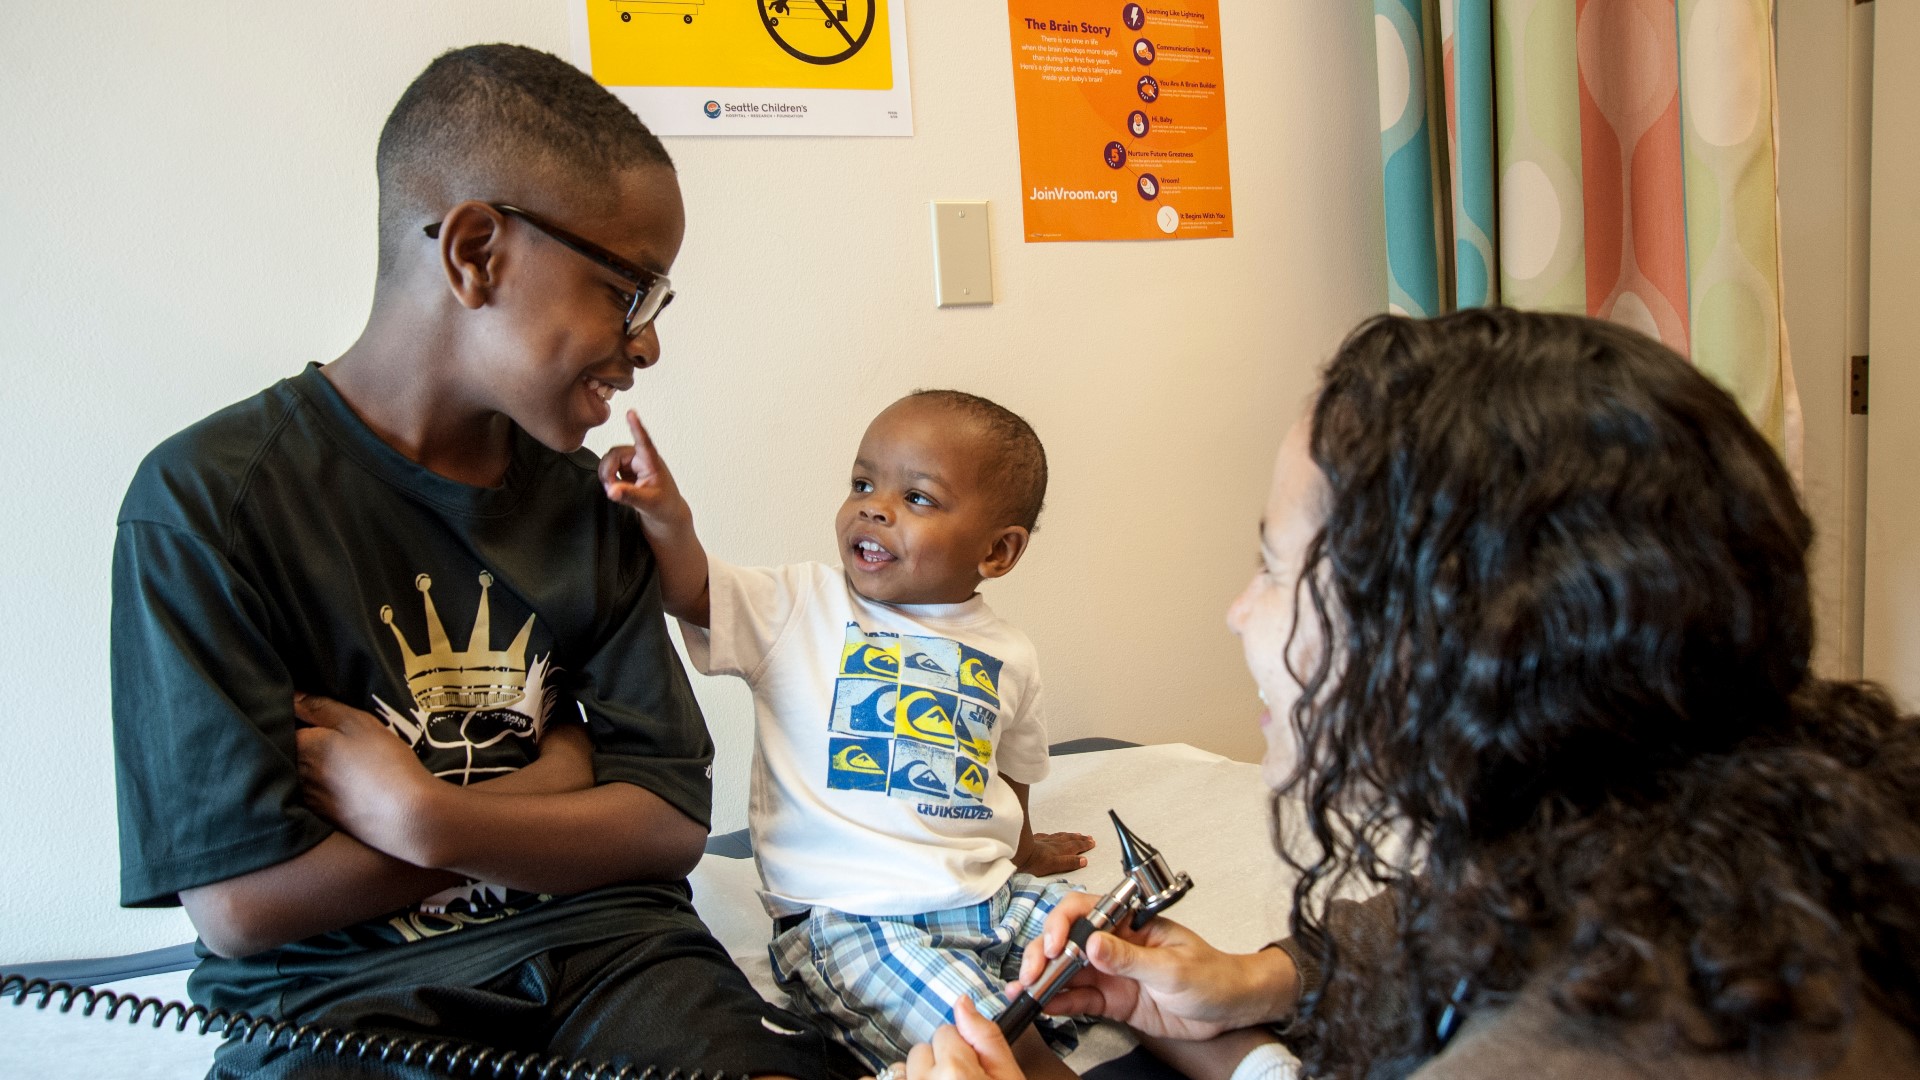 The beloved community clinic provides quality medical, dental, mental health, and nutrition services to Seattle-area families. Sponsored by Seattle Children's